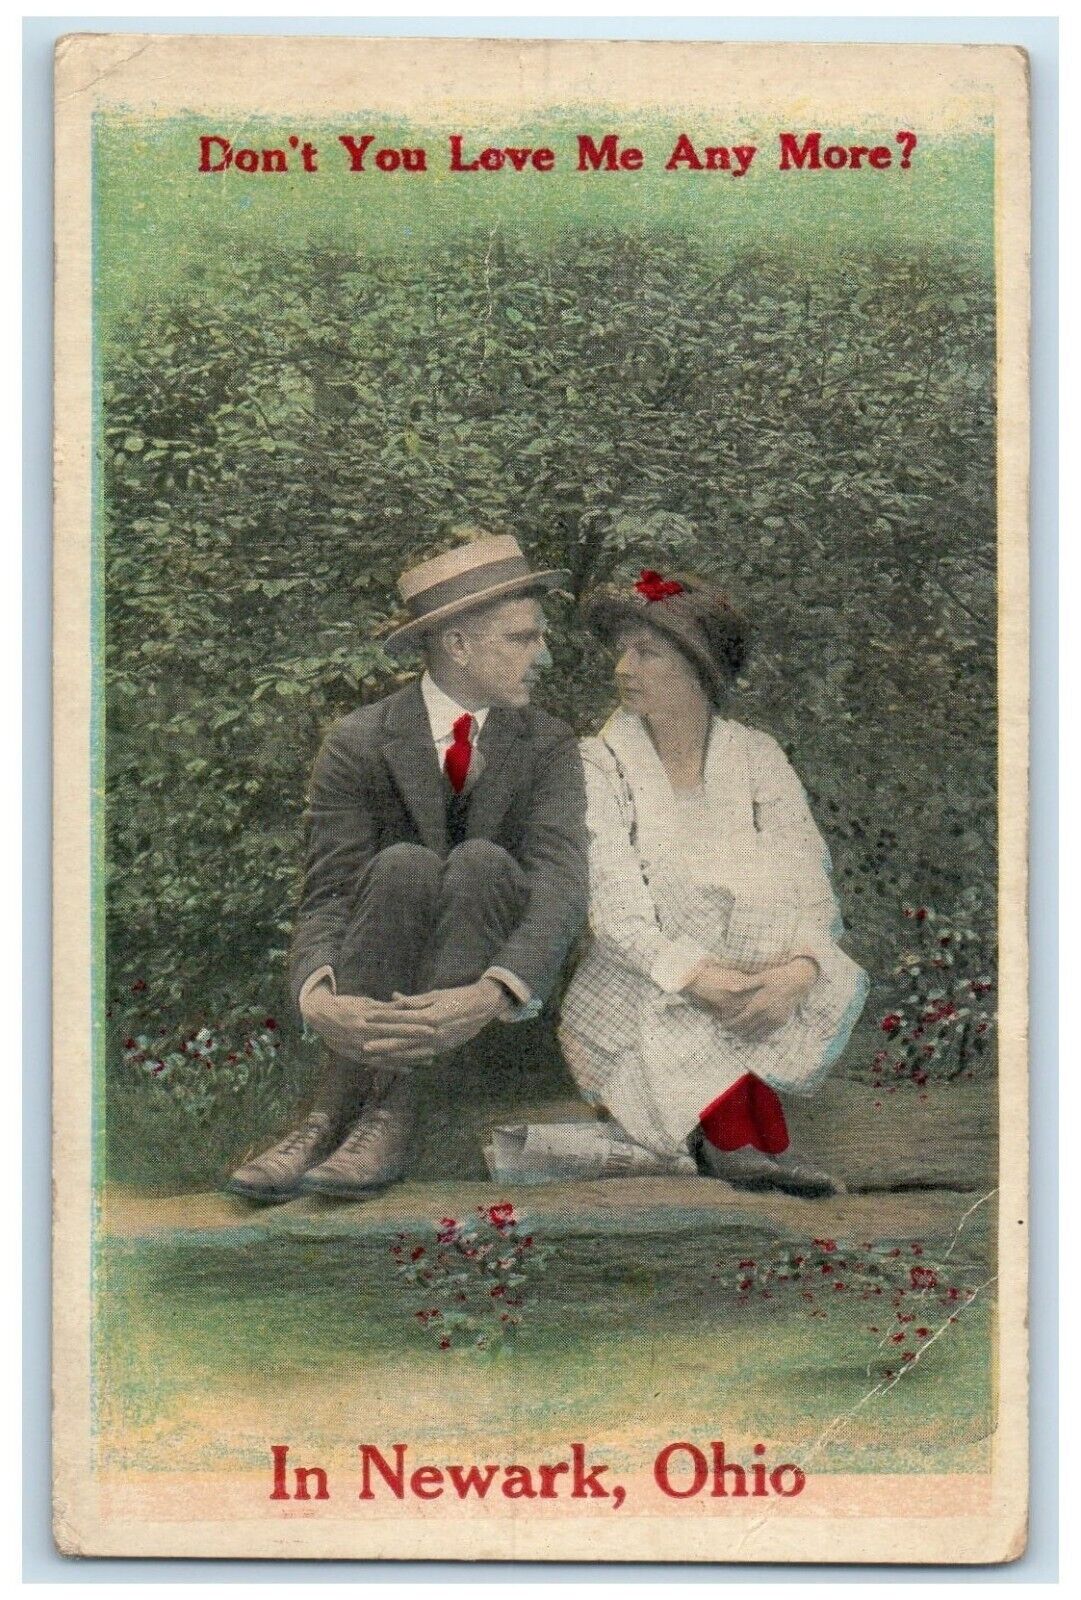 c1910 Don't You Love Me Any More Couple Lovers Newark Ohio OH Vintage Postcard